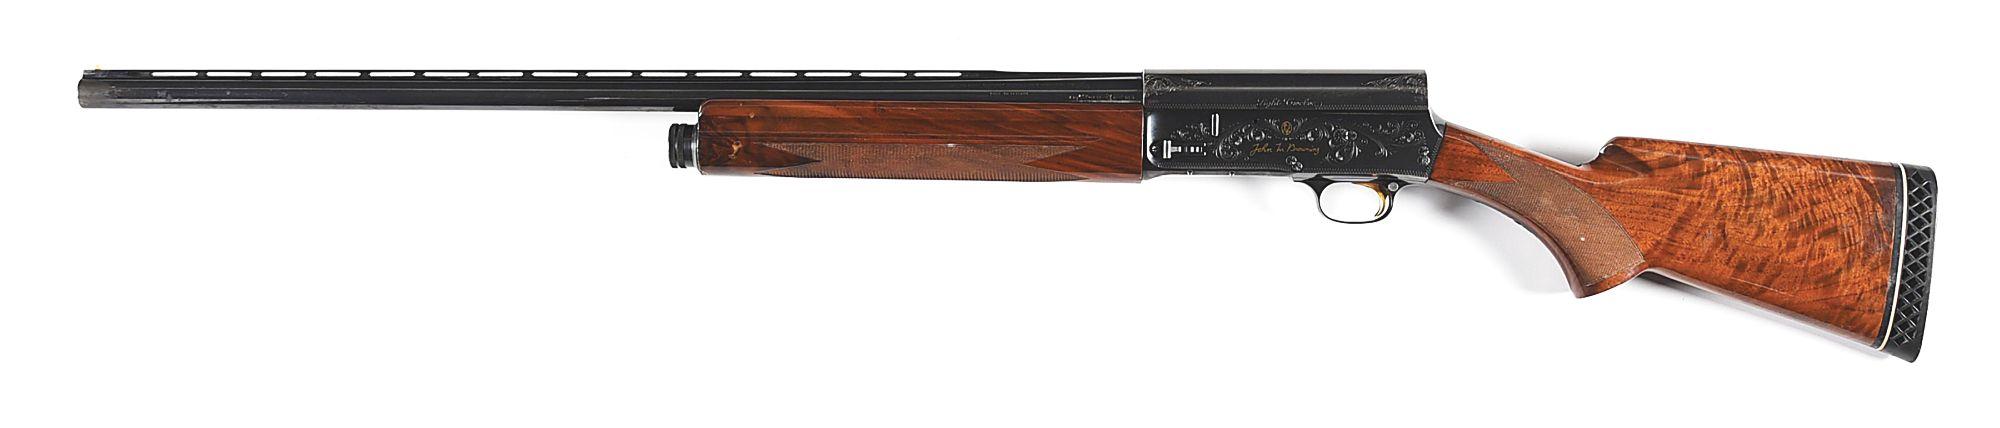 (M) BROWNING A5 LIGHT 12 SEMI-AUTOMATIC SHOTGUN, 2 MILLION SPECIAL EDITION